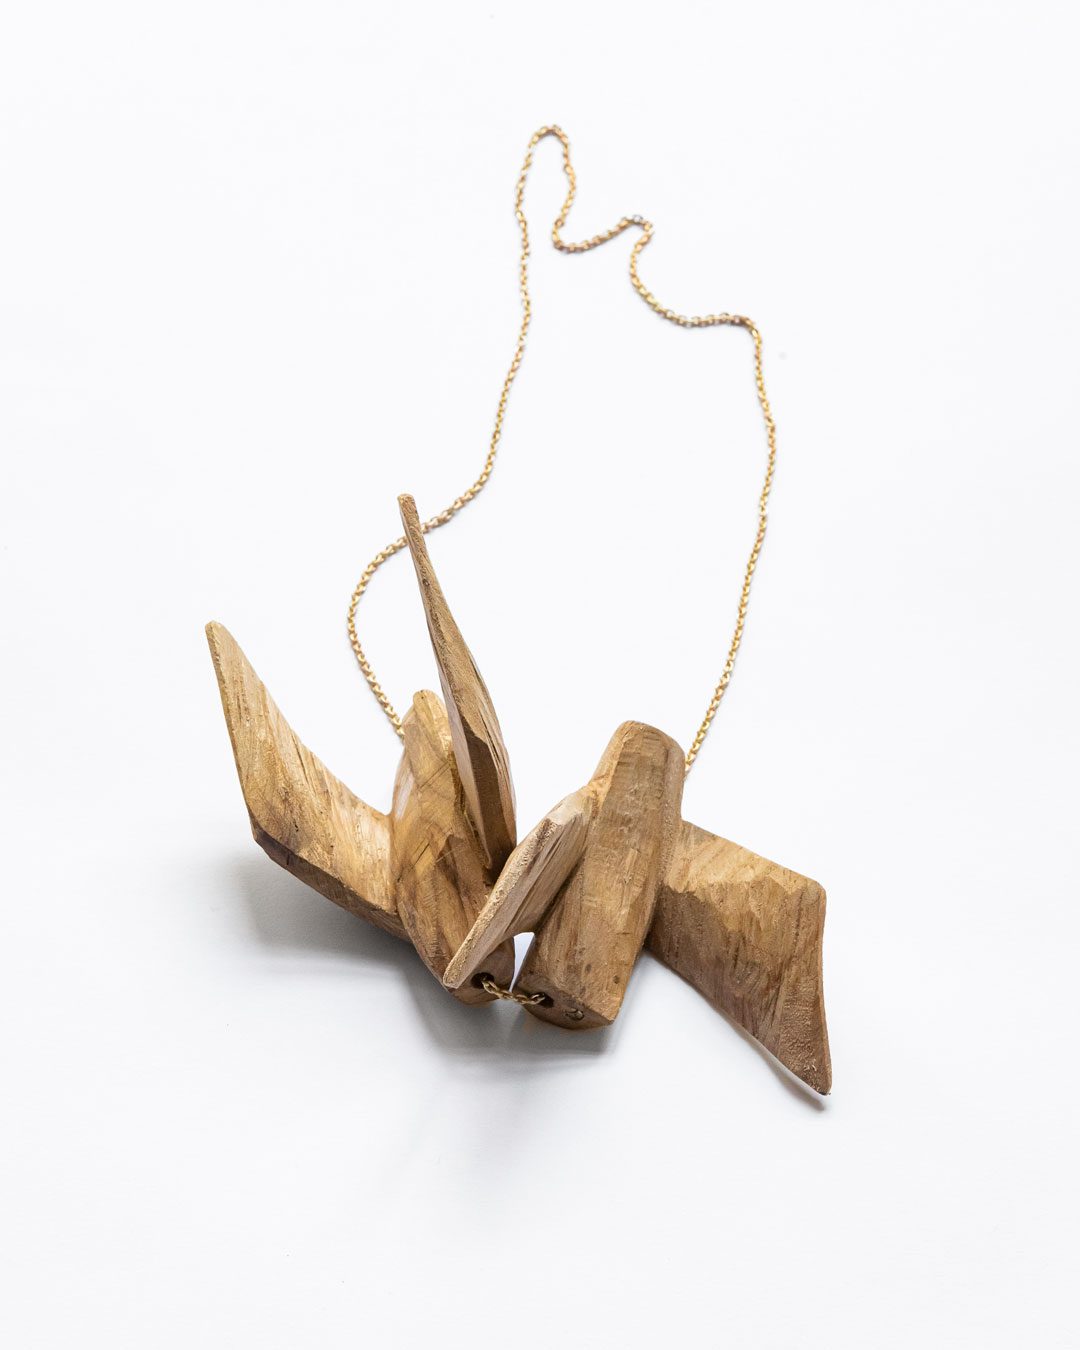 Dorothea Prühl, necklace, Two Small Birds (Zwei kleine Vögel), 2022, elm wood and gold, length of one form: 80 mm, price on request